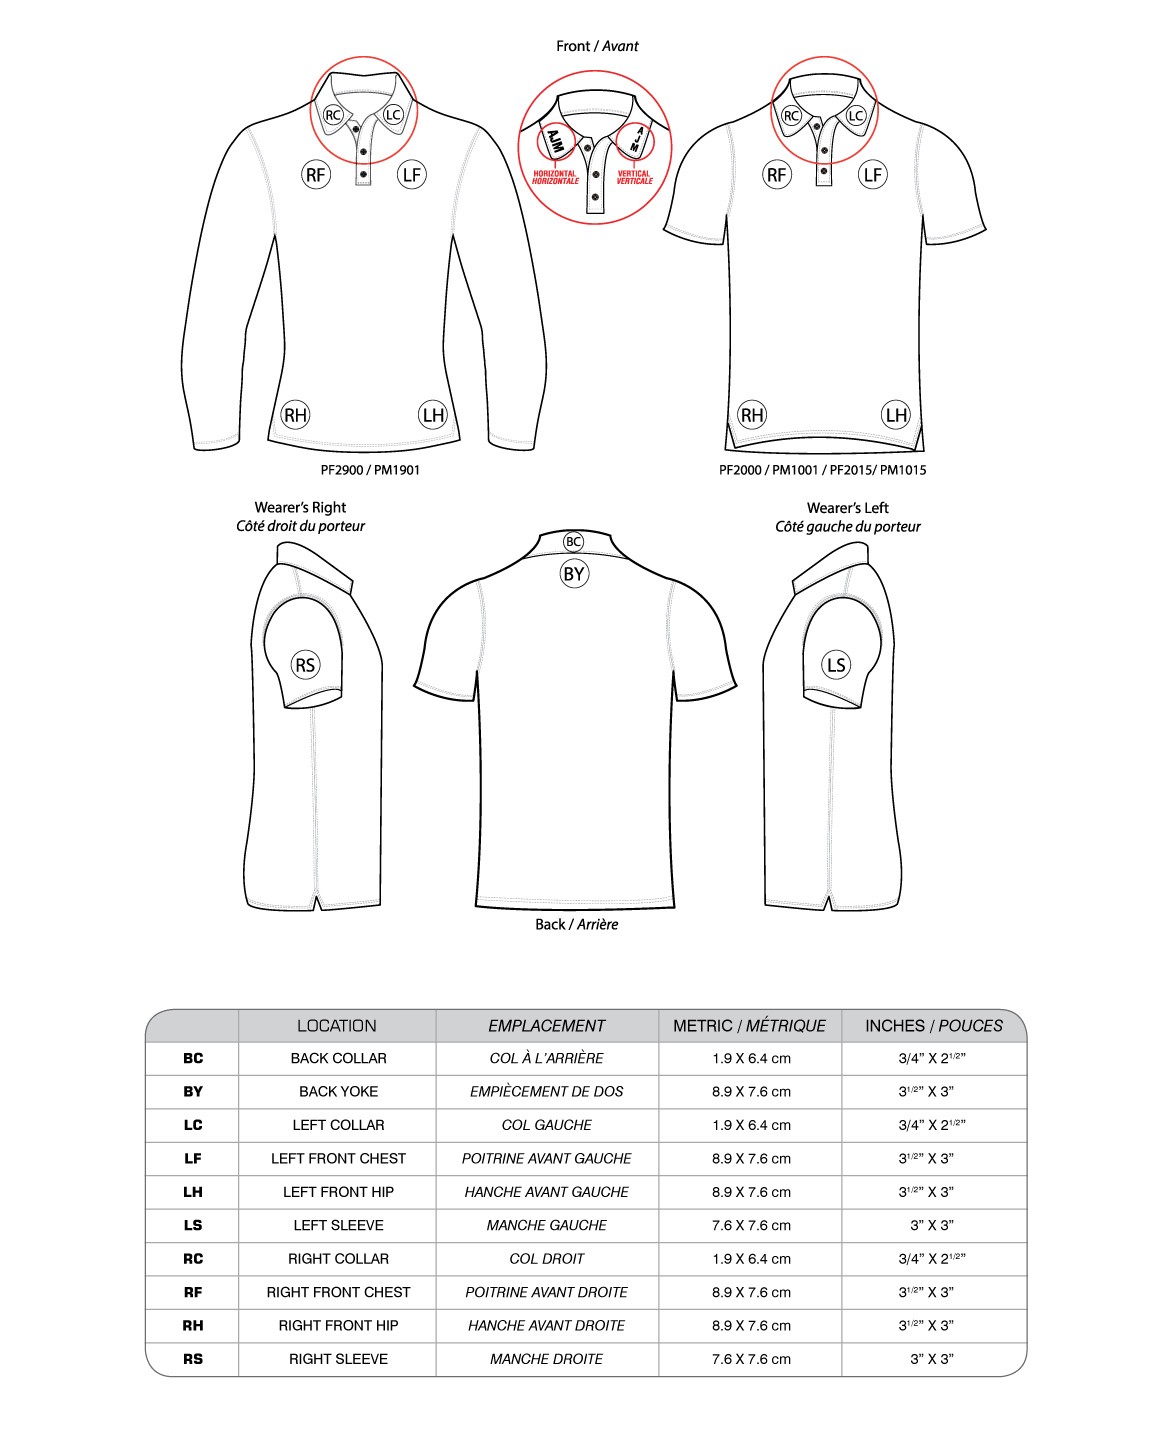 Embroidery Location Chart for Polo Shirts